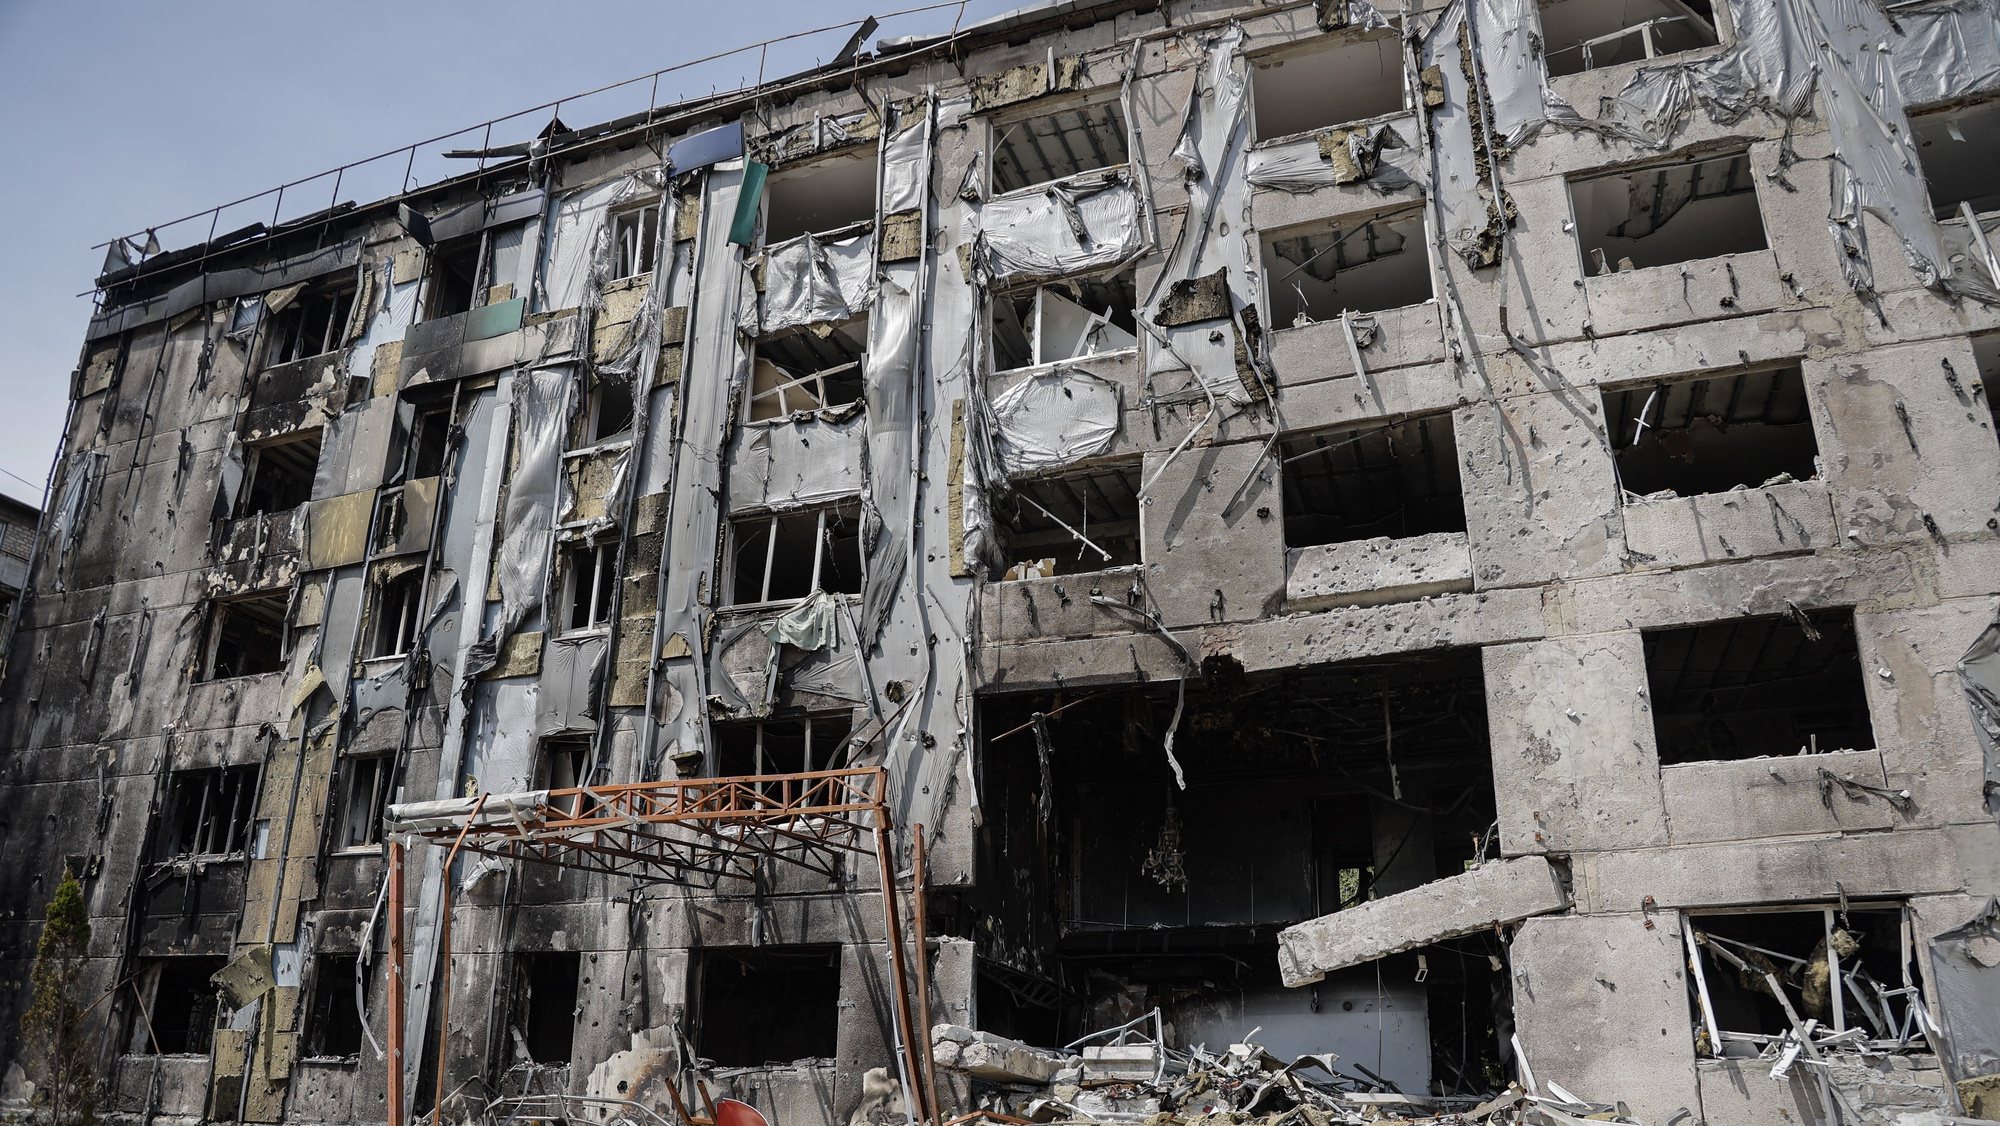 epa09964988 The destroyed Security Service of Ukraine (SBU) building in Mariupol, Ukraine, 21 May 2022 (issued 22 May 2022). The Chief spokesman of the Russian Defense Ministry, Major General Igor Konashenkov, said on 20 May that the long-besieged Azovstal steel plant in Mariupol was under full Russian army control.  EPA/ALESSANDRO GUERRA